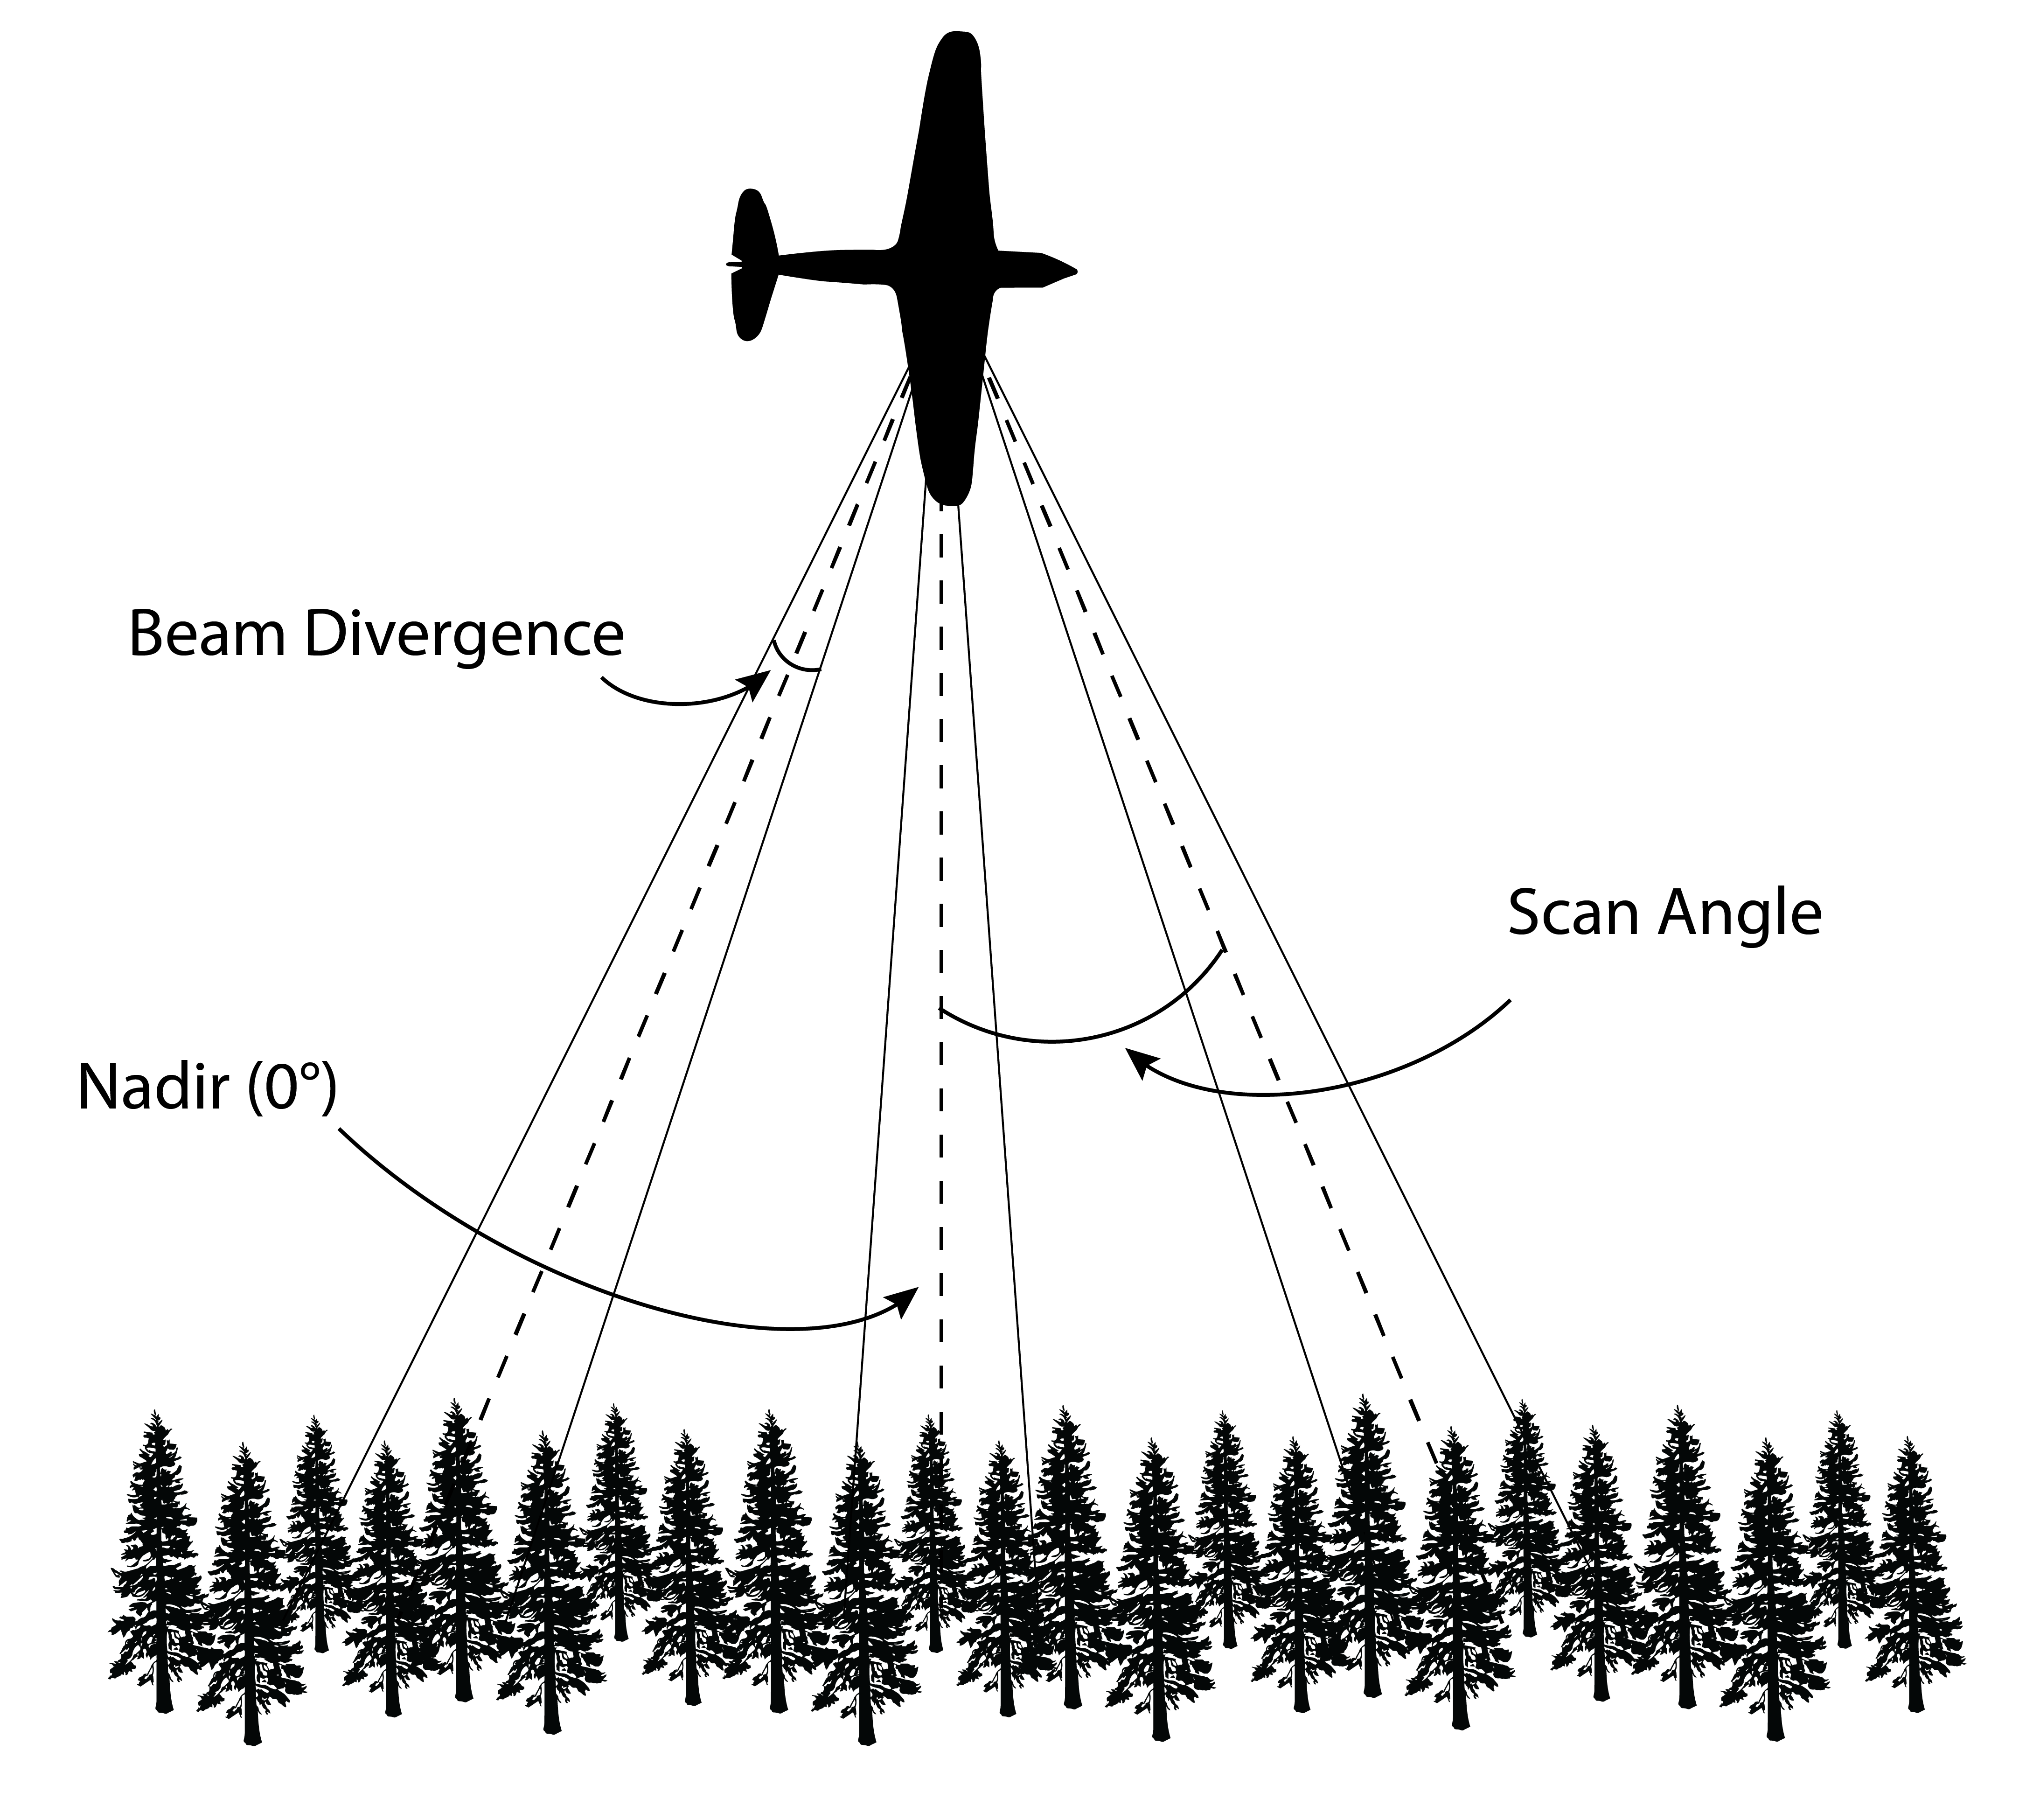 Scan angle is the angle from nadir at which the laser is pointing. The scan angle and aircraft flight height together are responsible for swath width. Du Toit, CC-BY-SA-4.0.